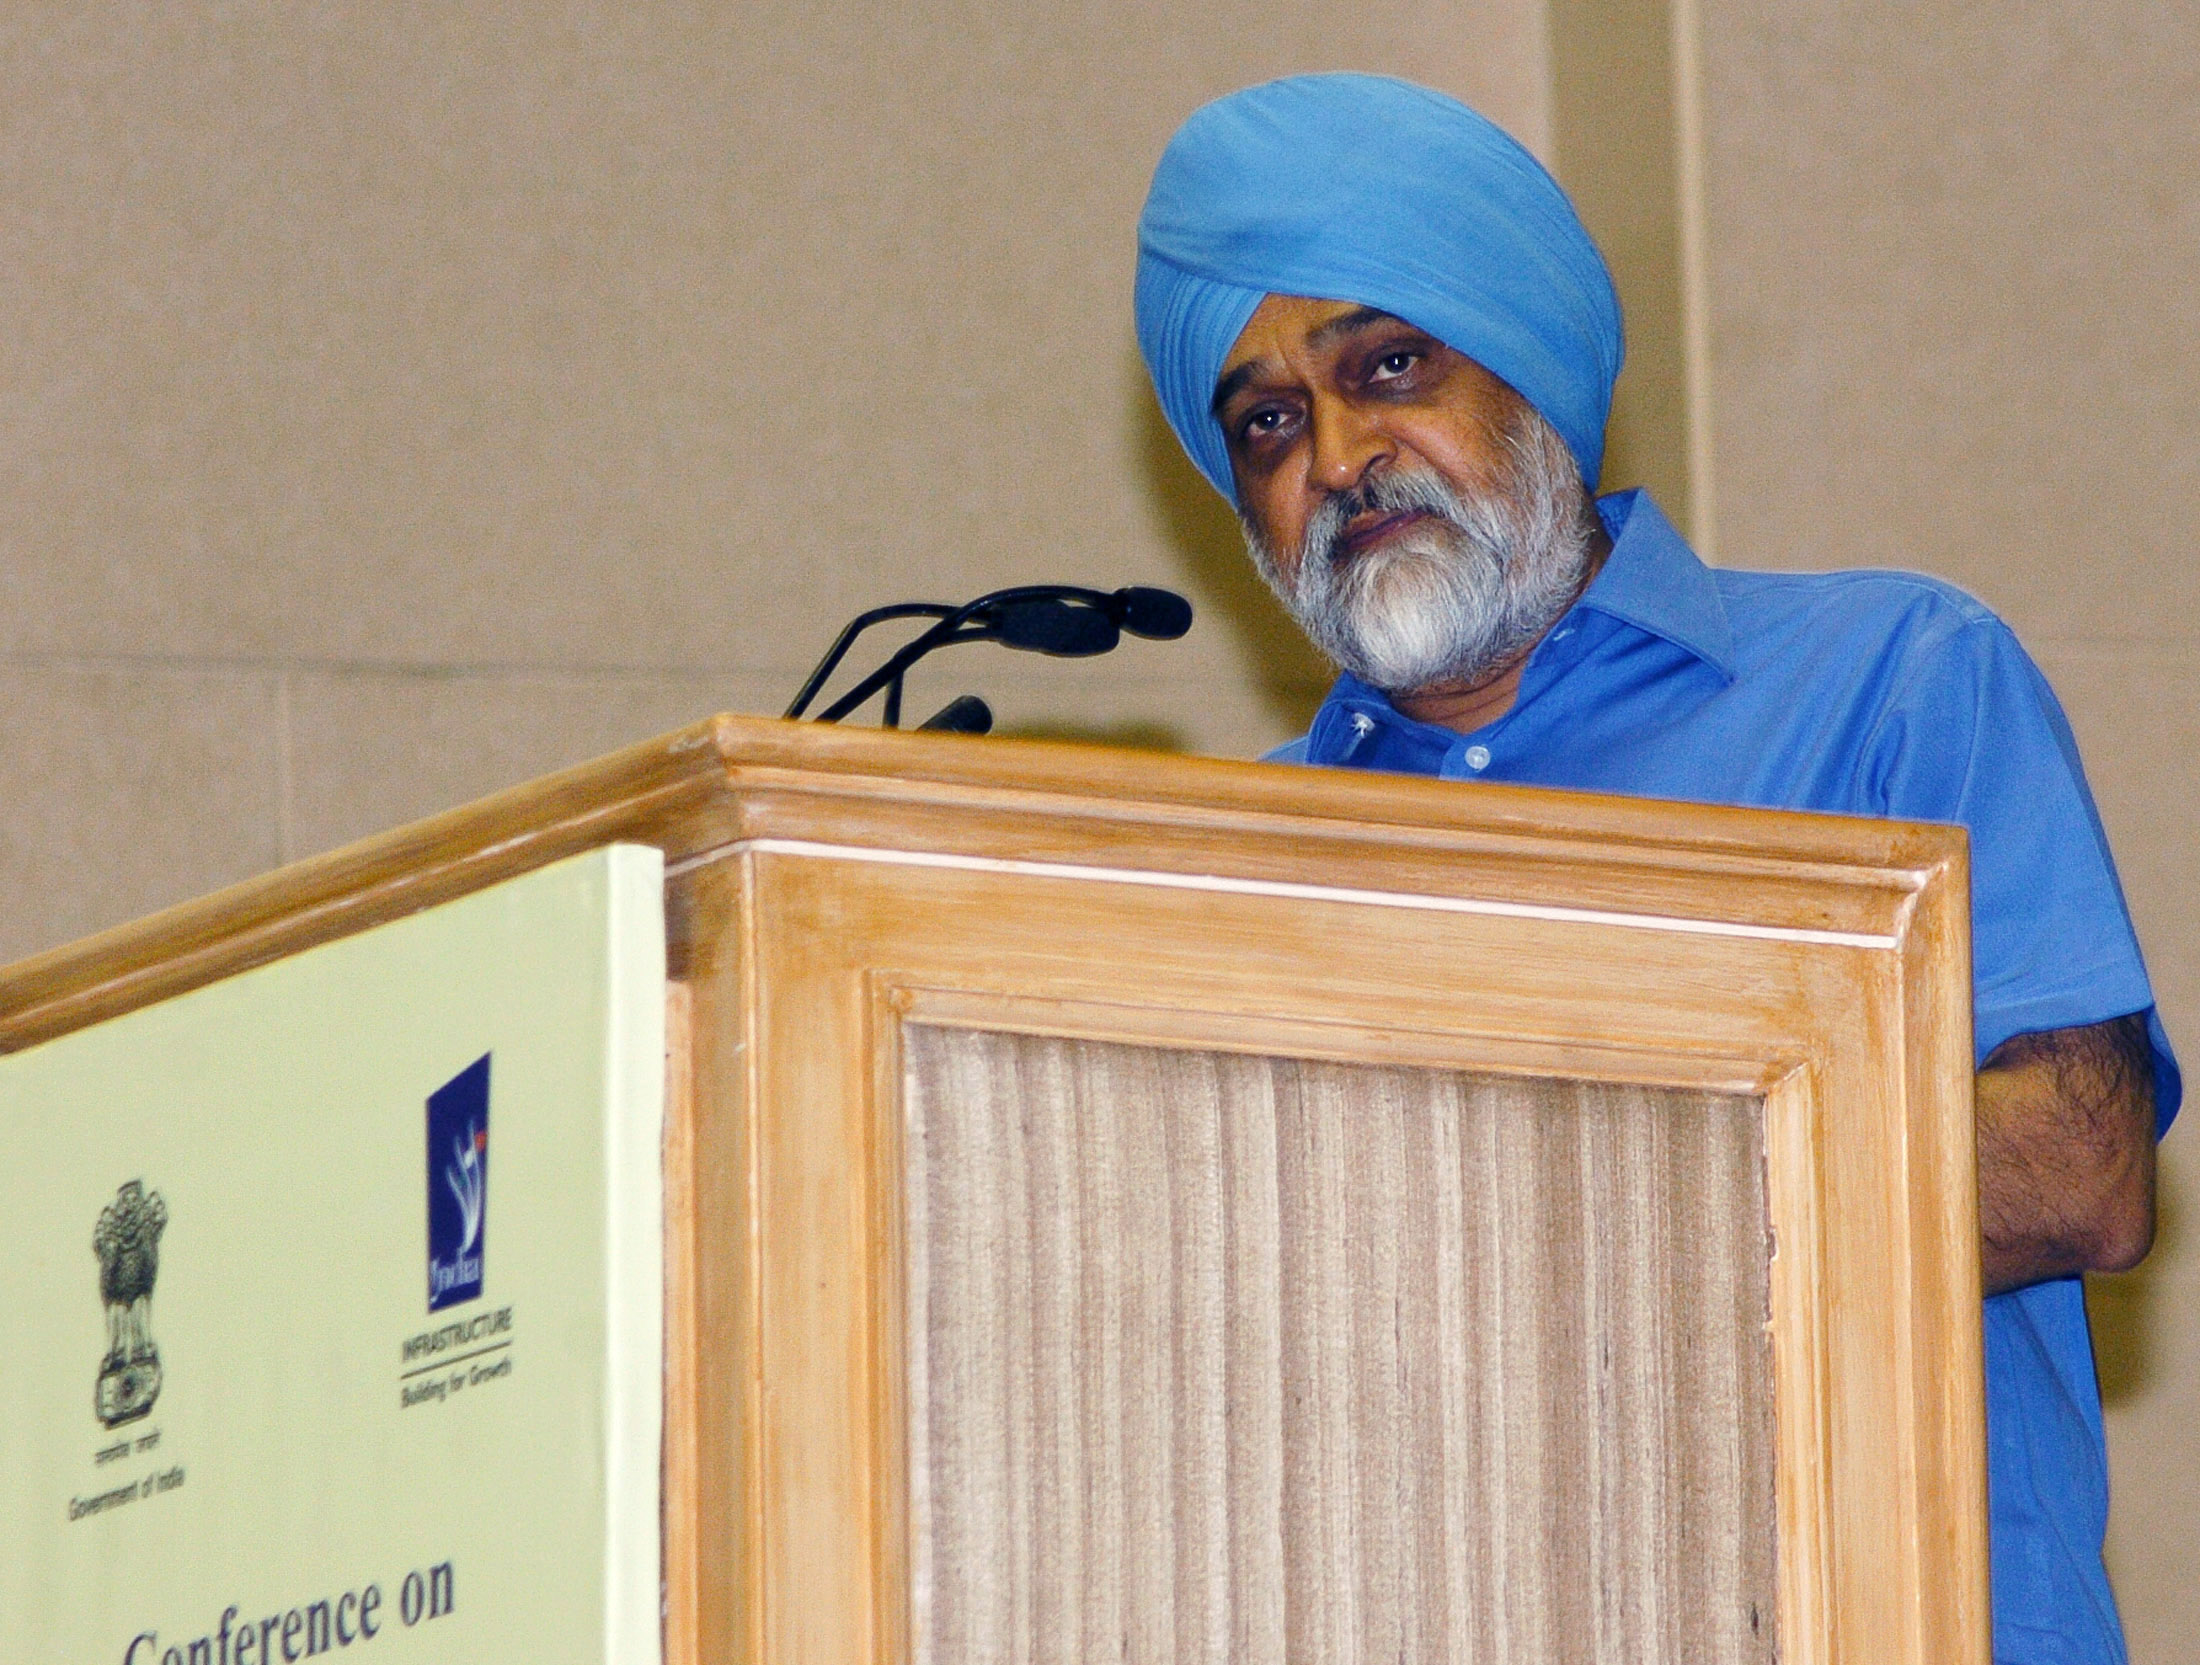 The Prime Minister, Dr. Manmohan Singh at the conference on Building Infrastructure: Challenges and Opportunities, at Vigyan Bhavan in New Delhi on March 23, 2010.